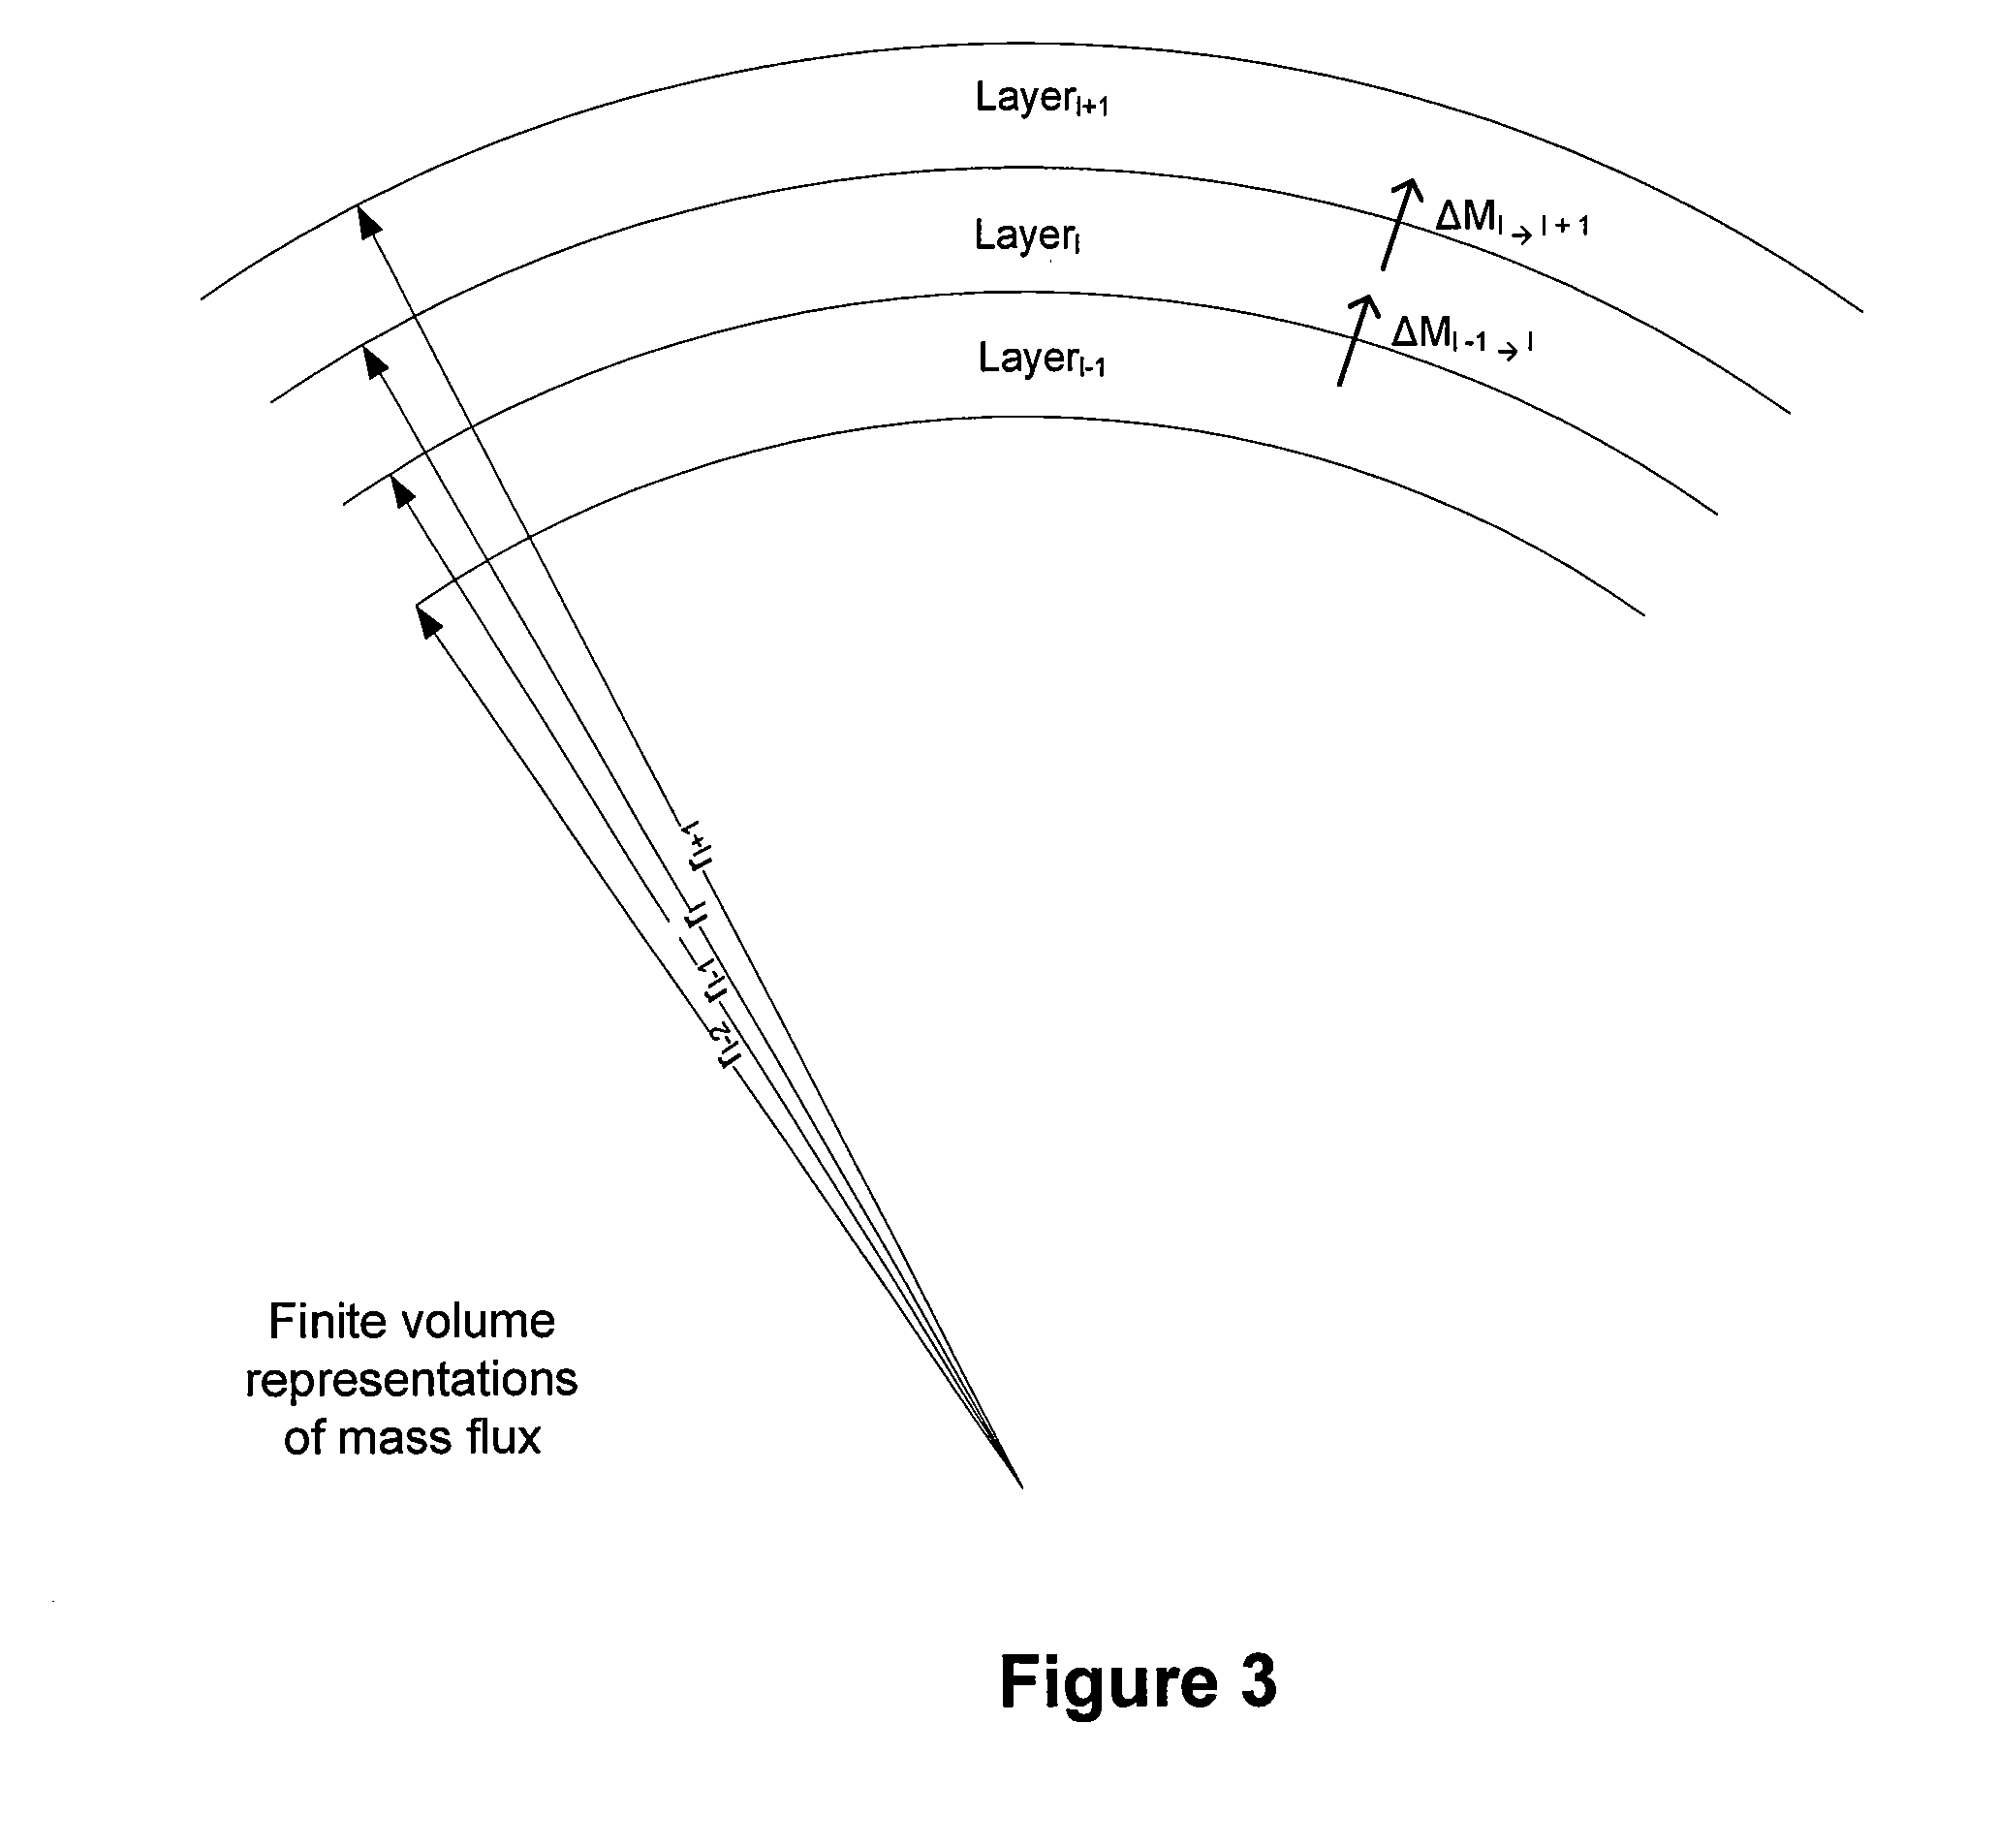 Method for extending long-term electrical power cable performance